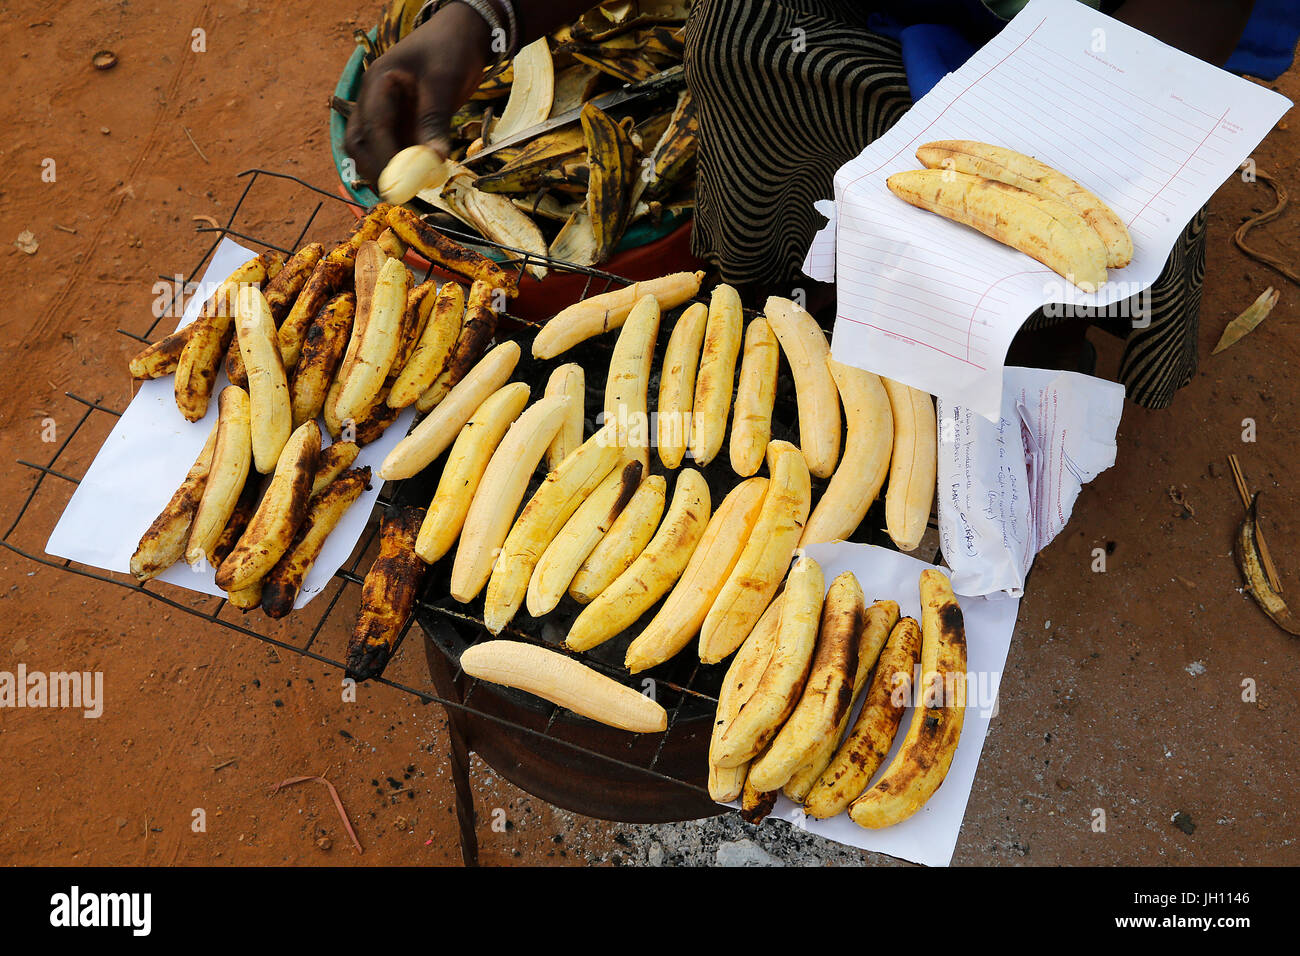 Woman making and selling grilled plantain in Mulago. Uganda. Stock Photo